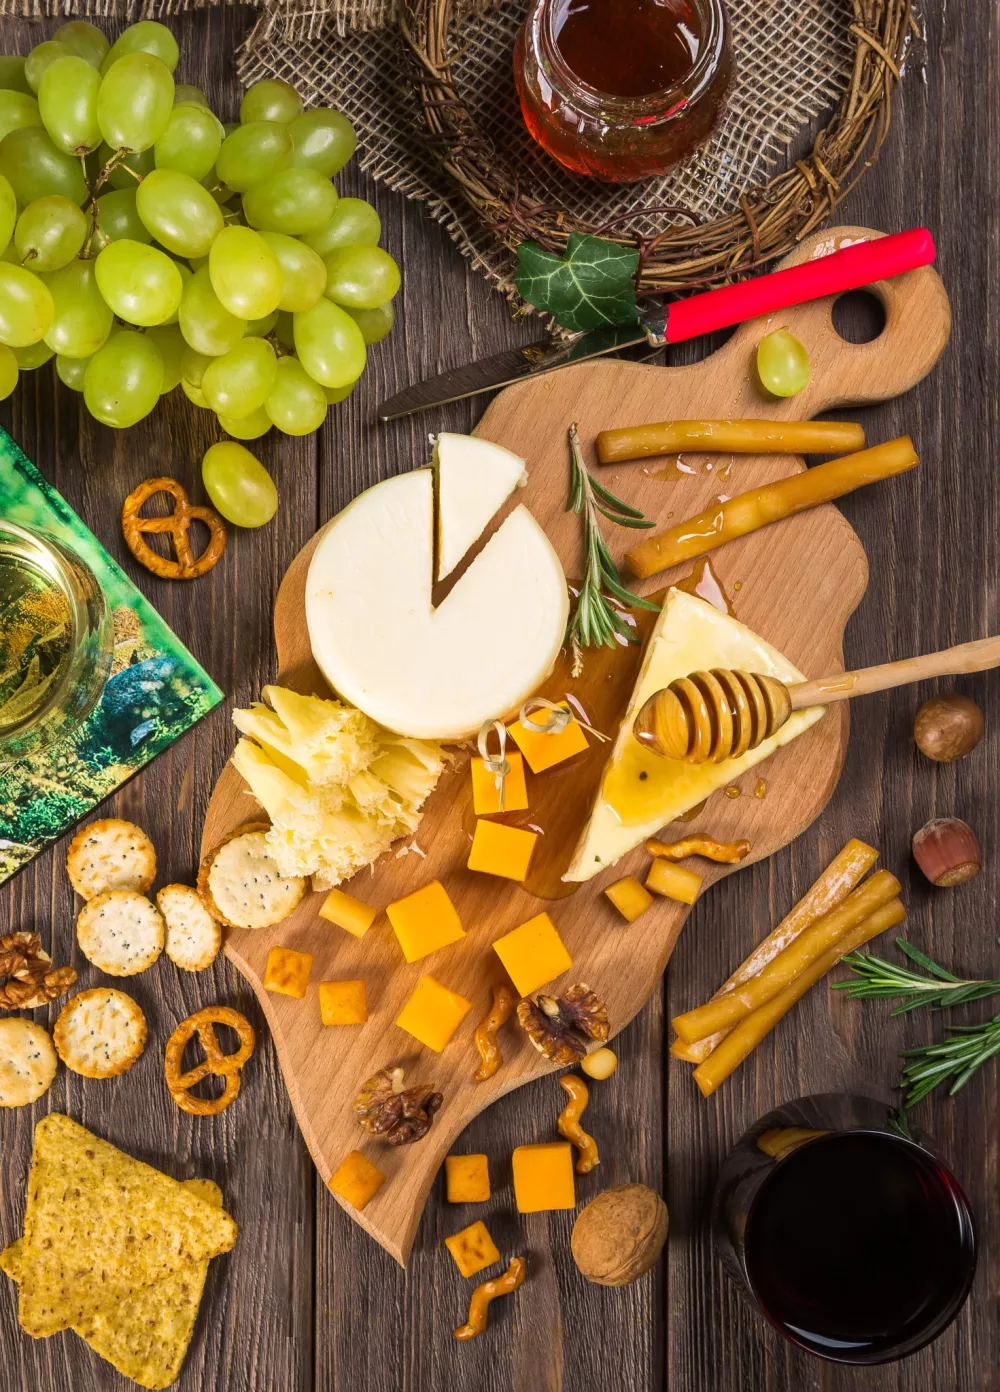 Snack board of cheese, crackers, honey, fresh fruit and pretzels